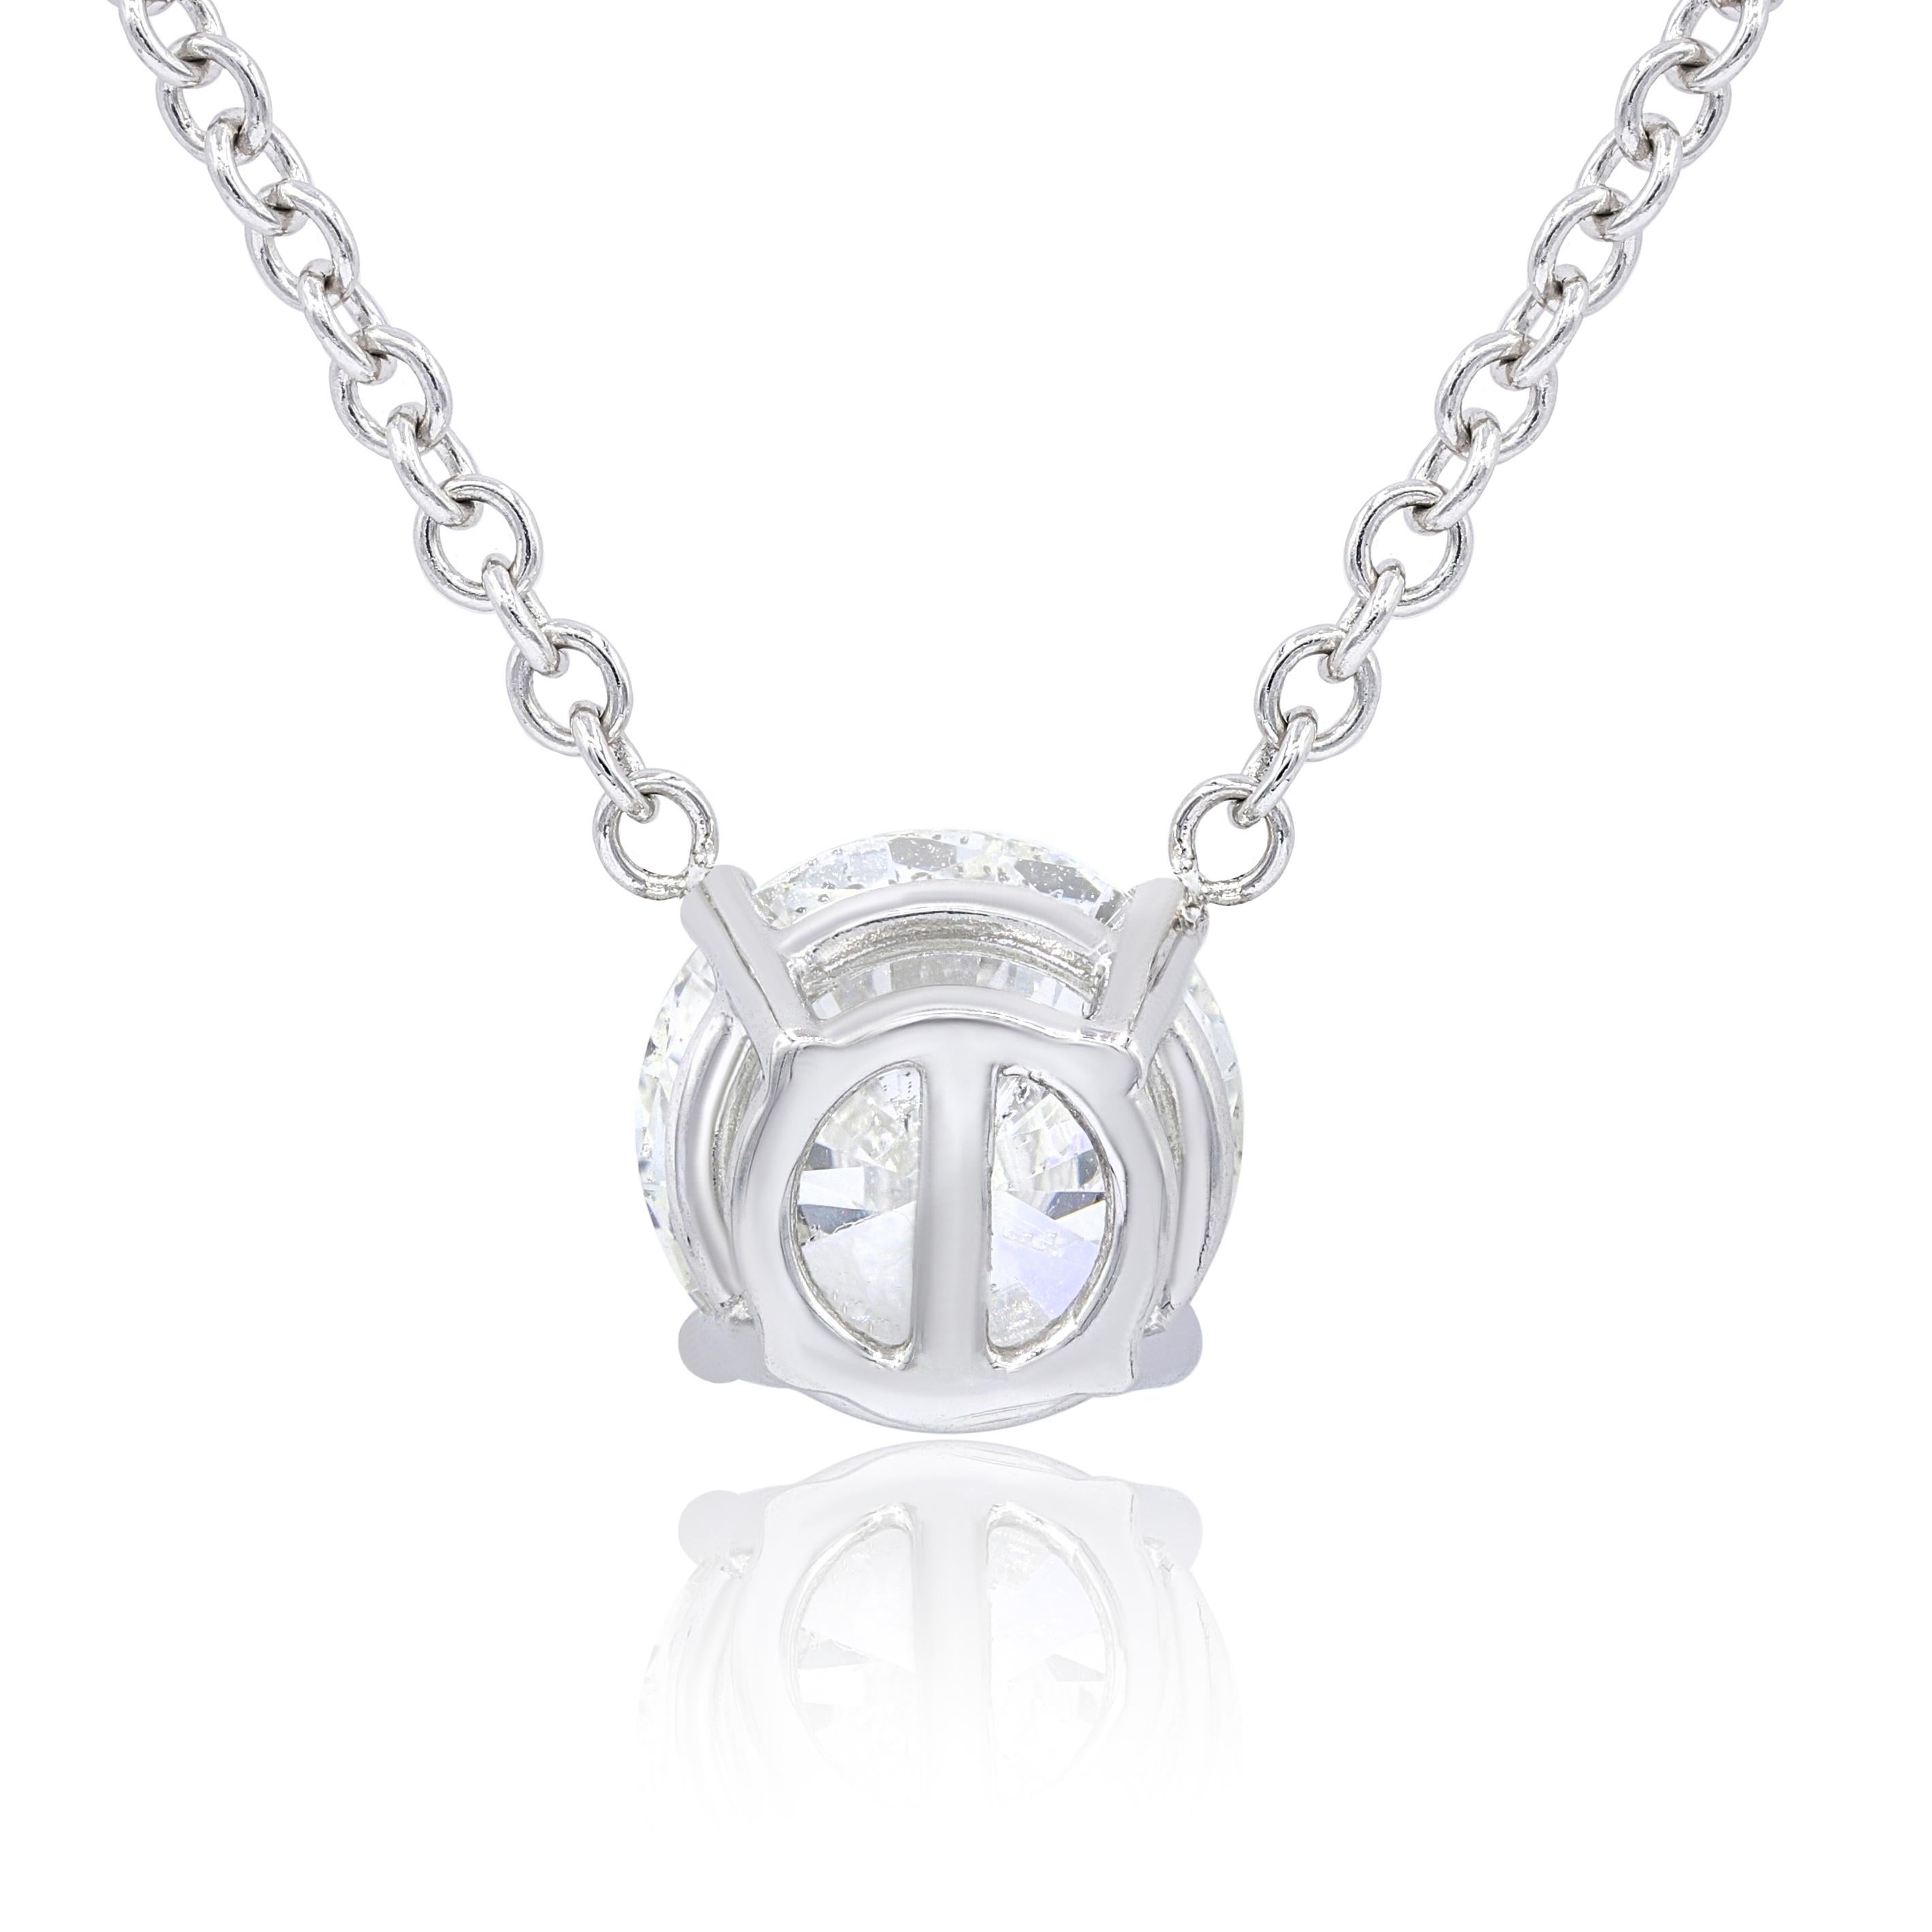 18KT White Gold Diamond Pendant, Feature 2.06ct GIA Certified Round Diamond Set in 4 Prong Setting On White Gold Chain

This product comes with a GIA certificate
This product will be packaged in a custom box

Composition:
18K white gold
2.06 ct